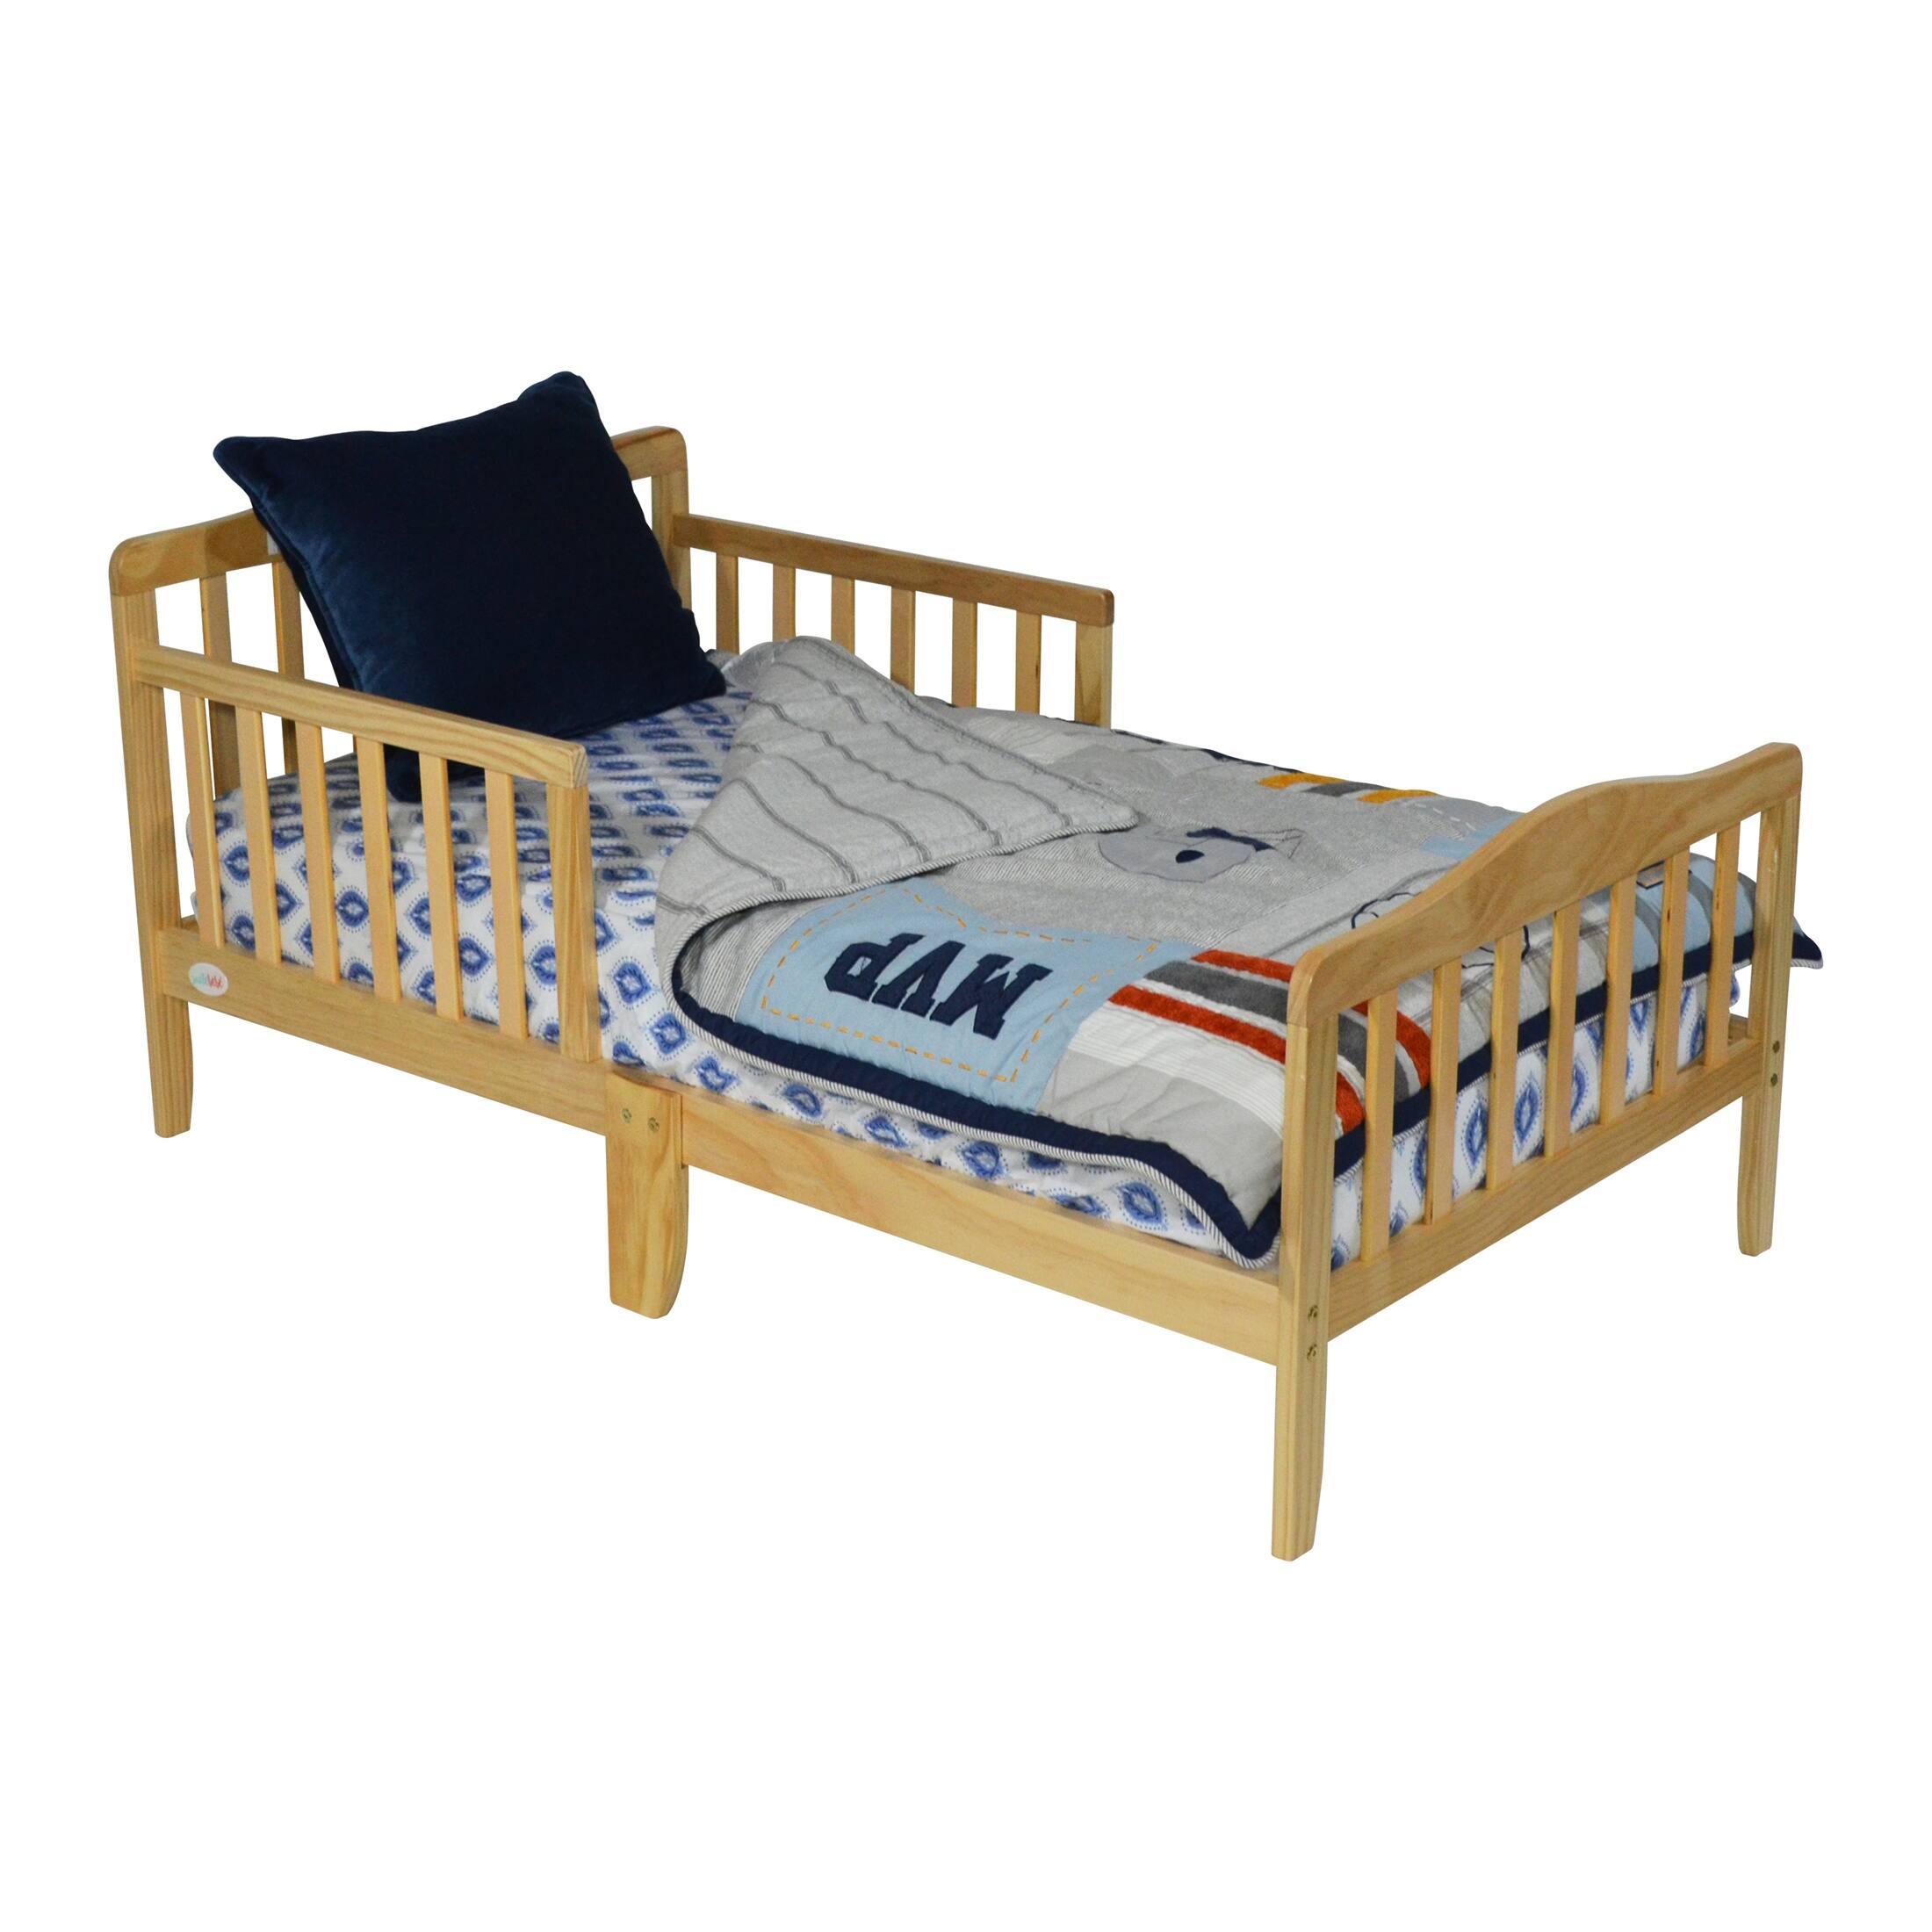 Kids Bed Toddler Bed with Fence for Kids Room